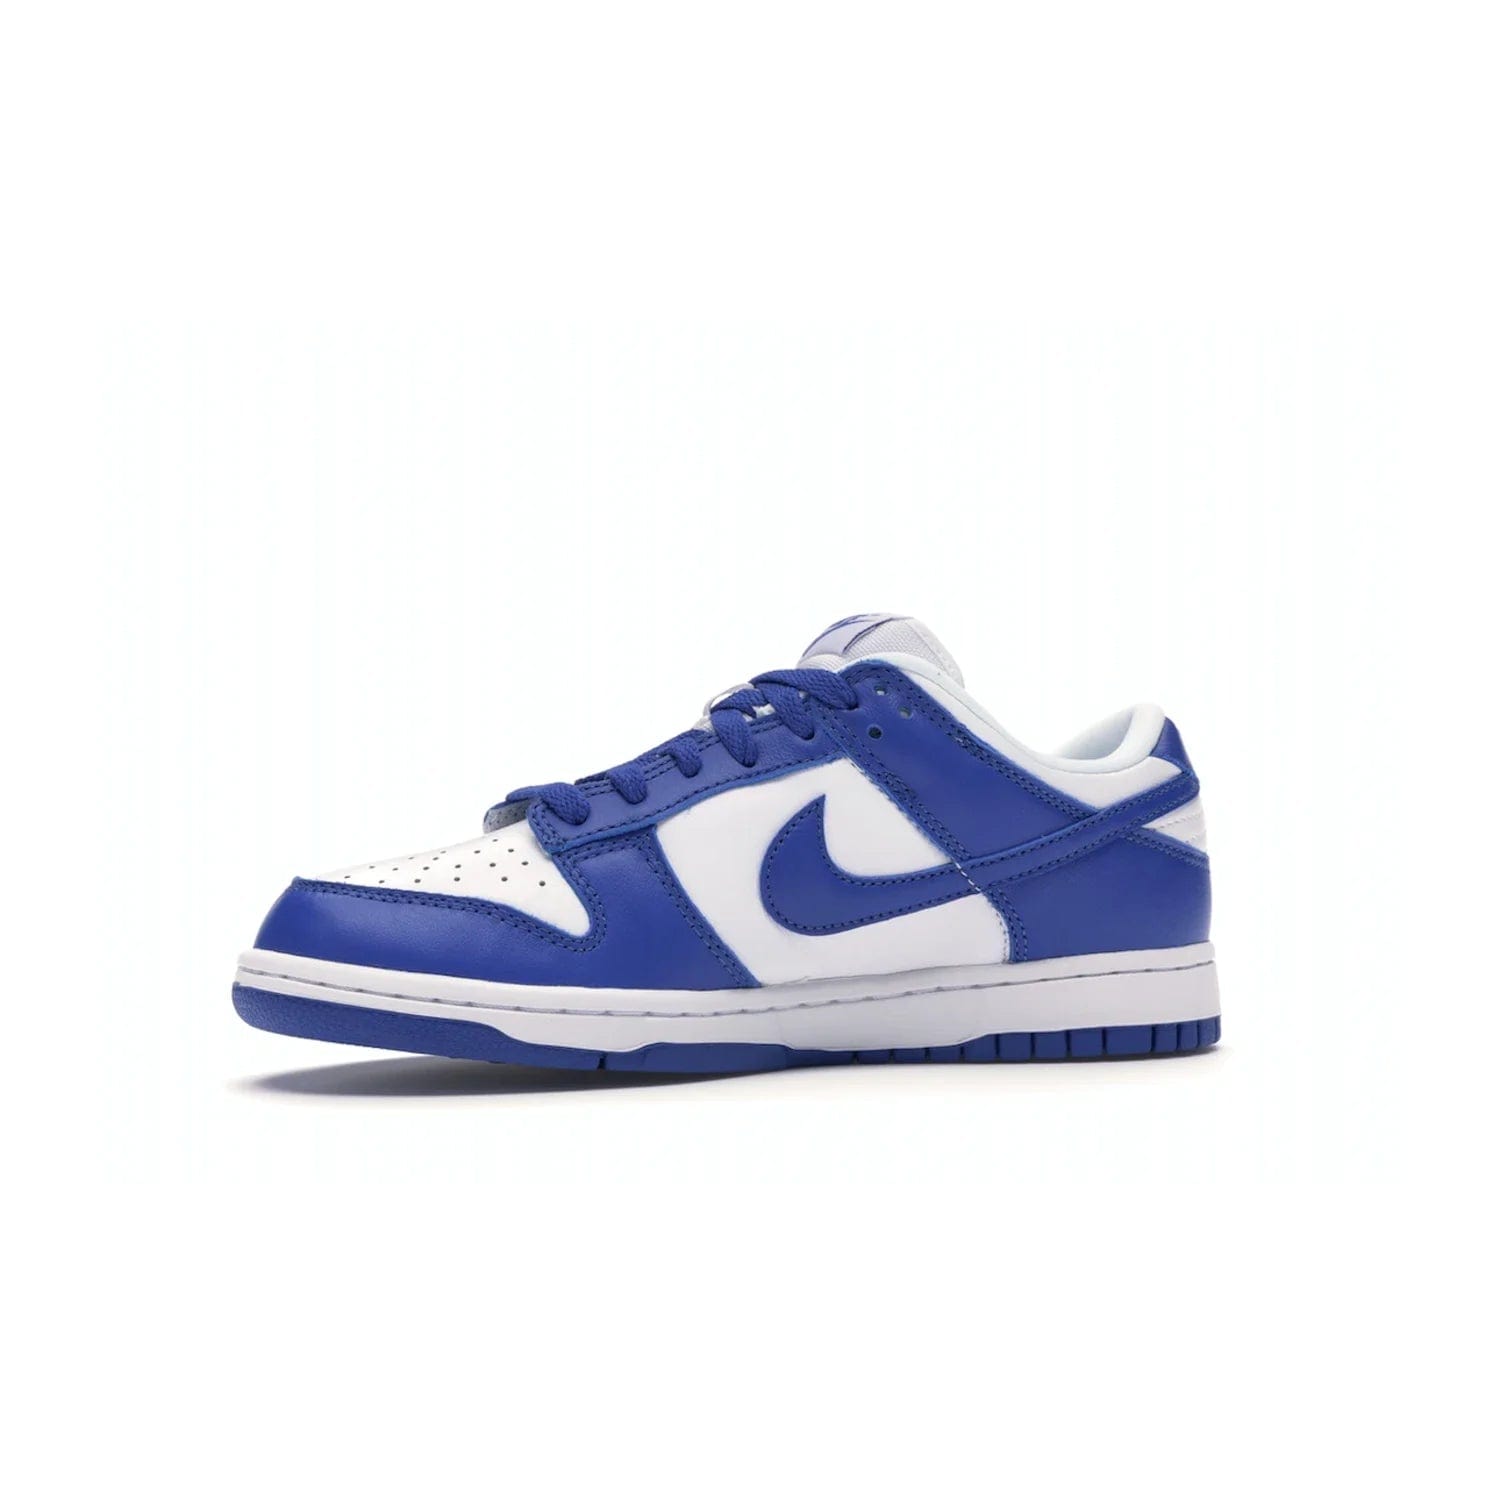 Nike Dunk Low SP Kentucky (2020/2022) - Image 17 - Only at www.BallersClubKickz.com - Classic Nike Dunk Low SP Kentucky with timeless White/Varsity Royal colorway. White leather upper, royal outsole, and Nike branding. A hit since March 2020 homage to the 1985 Nike College Colors program. Show your support with these classic kicks.